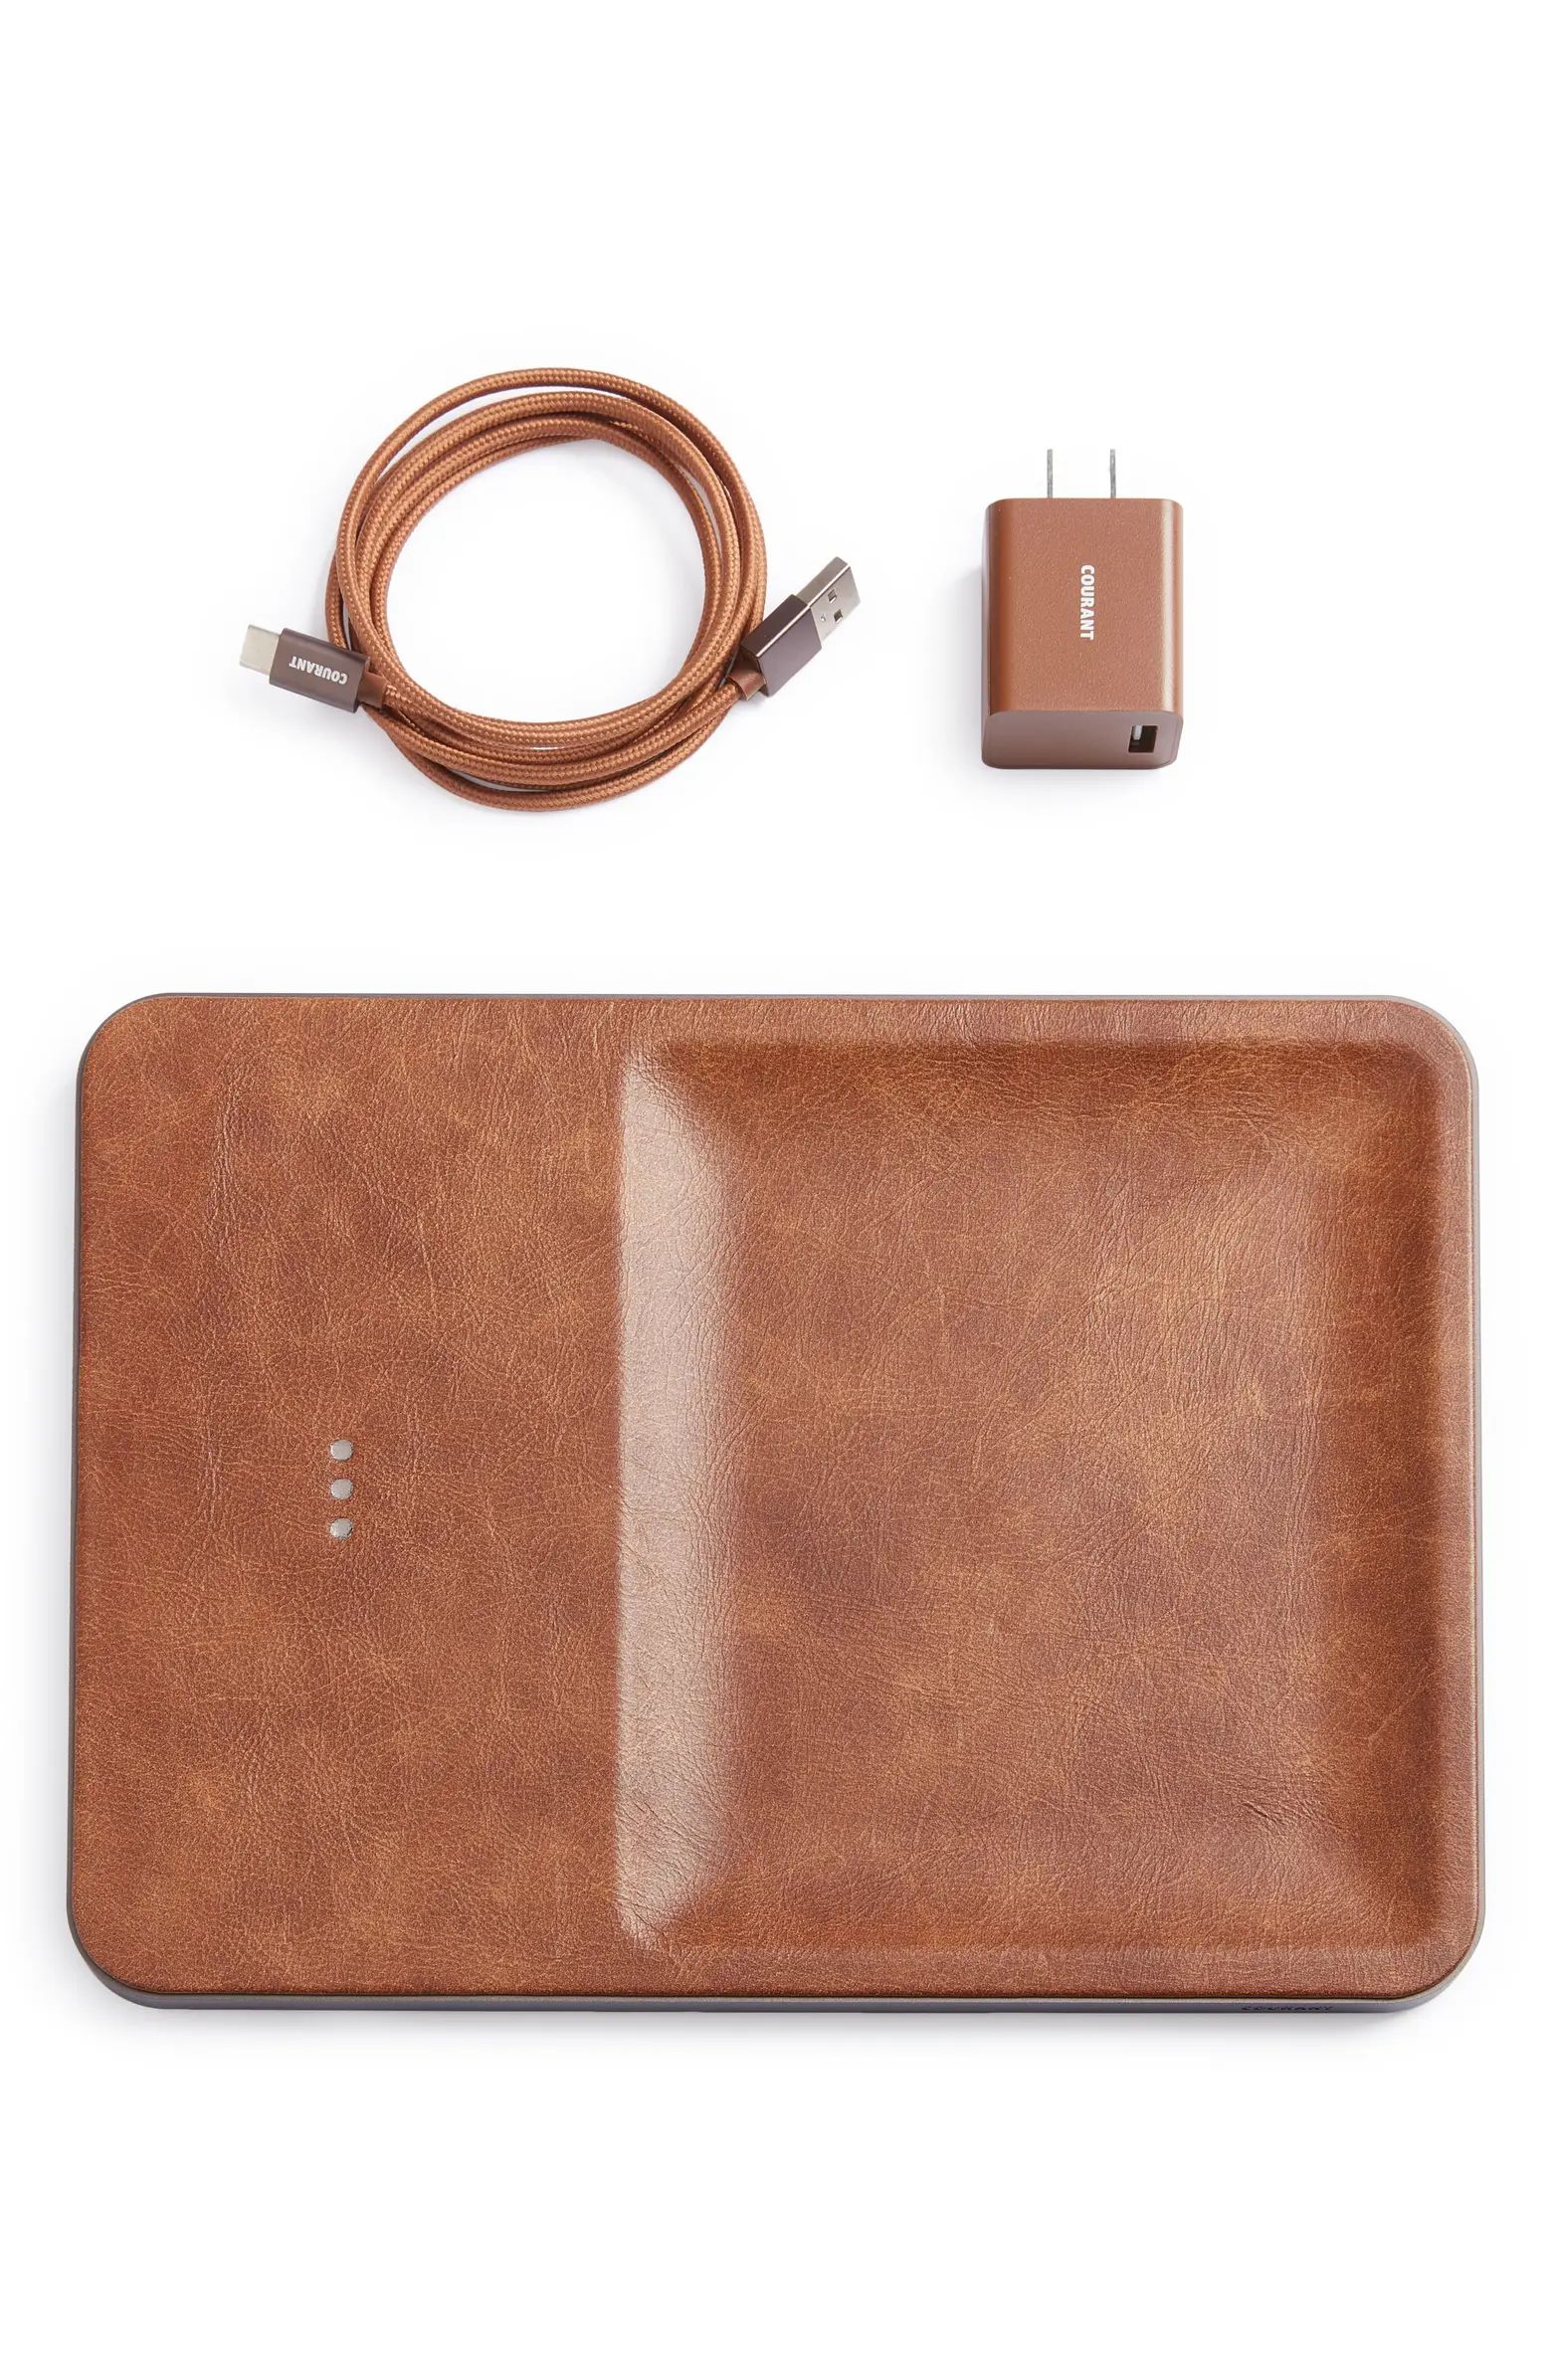 Courant Catch 3 Charging Pad | Nordstrom | Nordstrom